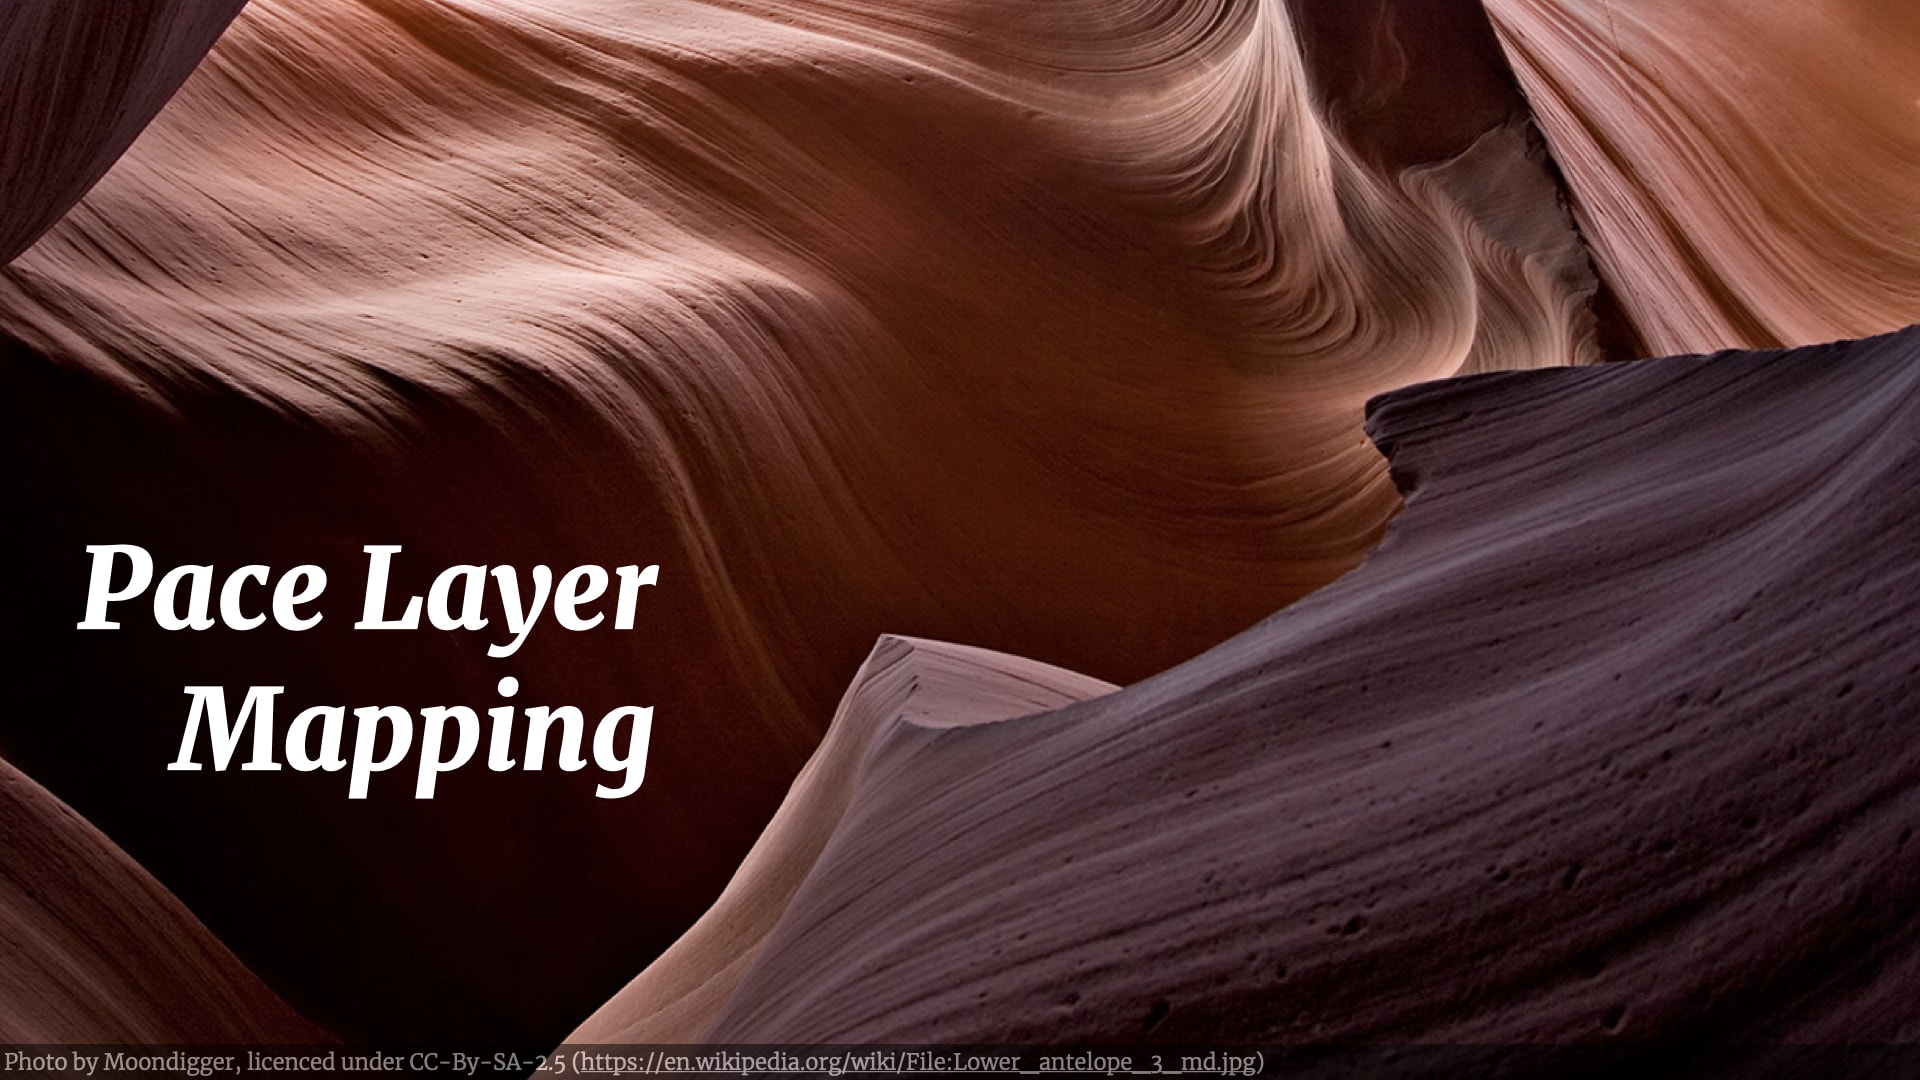 The talk title 'Pace Layer Mapping' on top of a photo of sunlit sandstone rock layers.